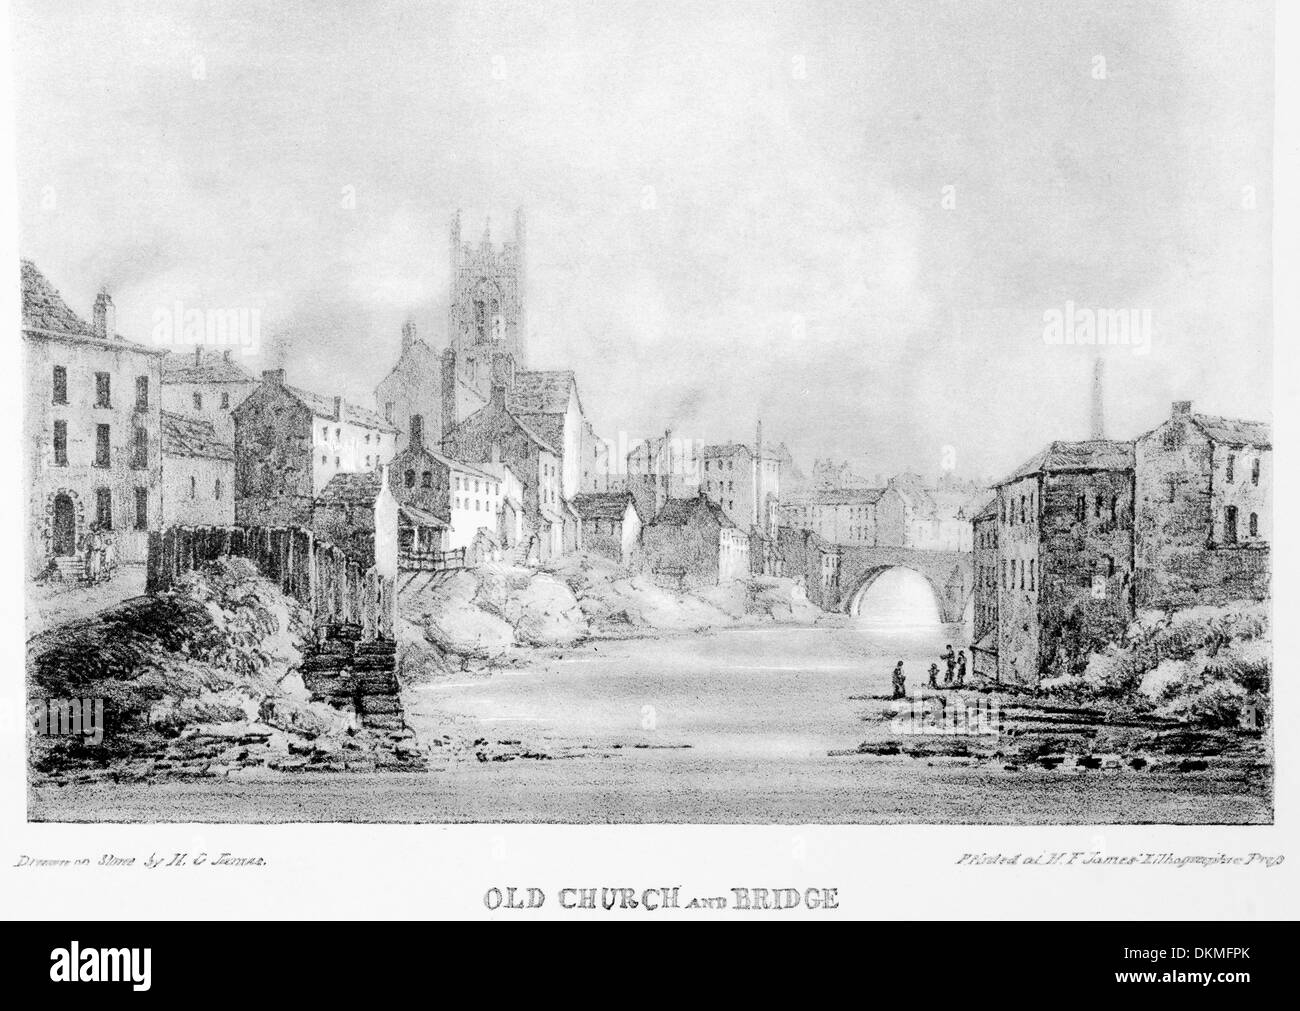 Copy of Lithographic print made in 1820 of Manchester Old Church and Bridge Cathedral in distance Stock Photo